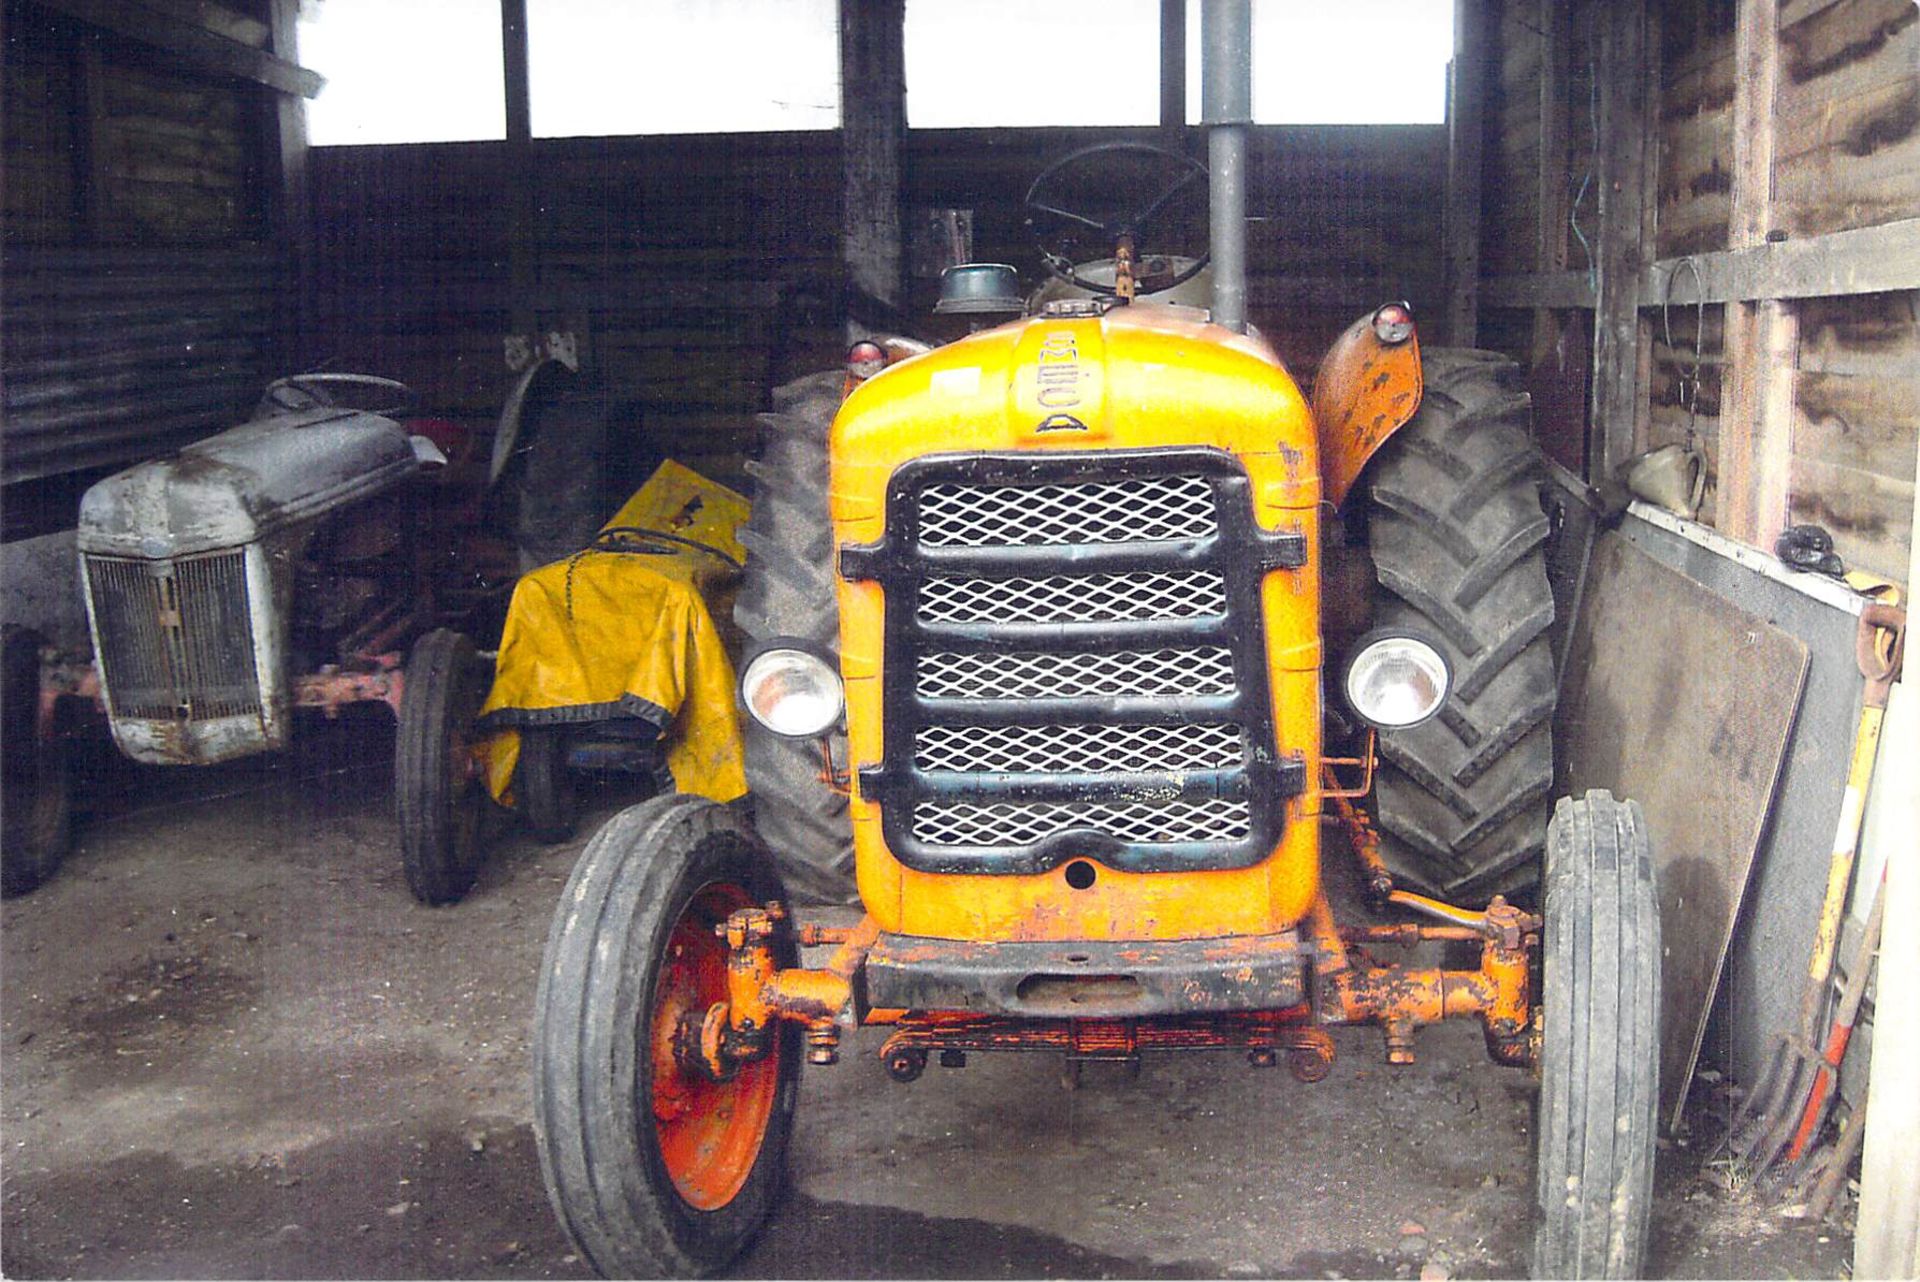 1960s SOMECA 40 4cylinder diesel TRACTOR Serial No: 67886 Fitted with 16.9x28 rear and 6.00x19 front - Image 2 of 3